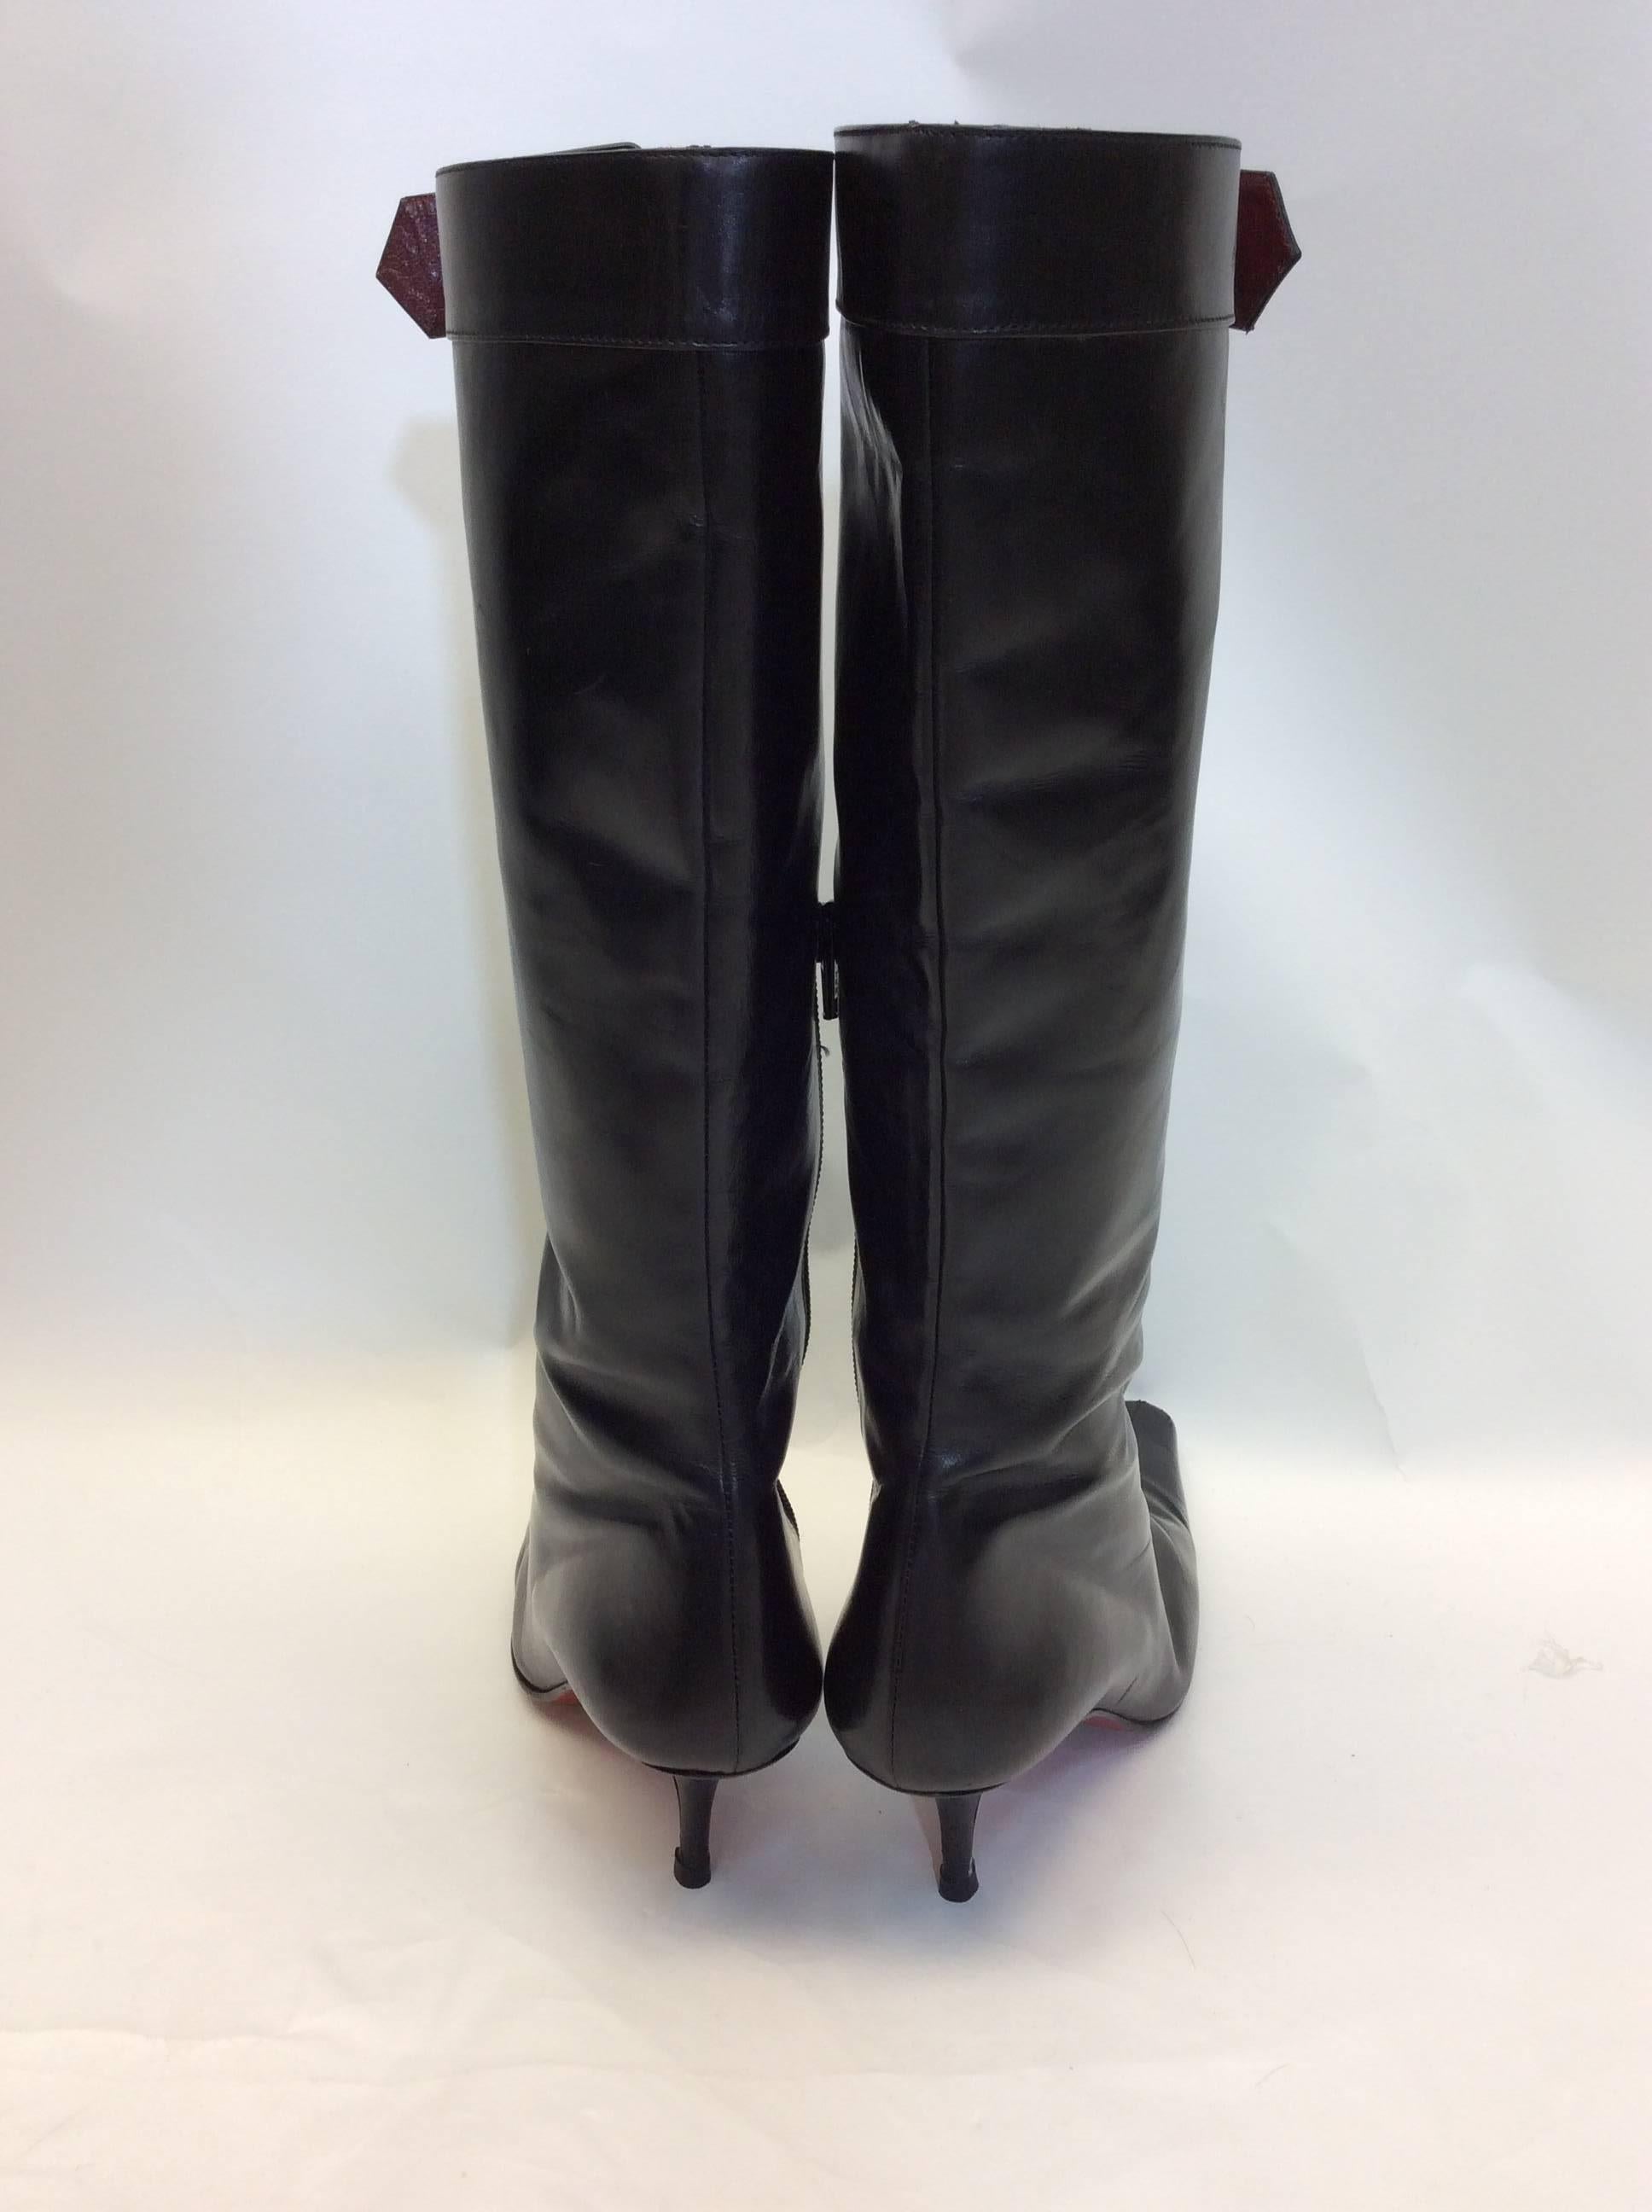 Christian Louboutin Black Leather Buckle Boots In Good Condition For Sale In Narberth, PA